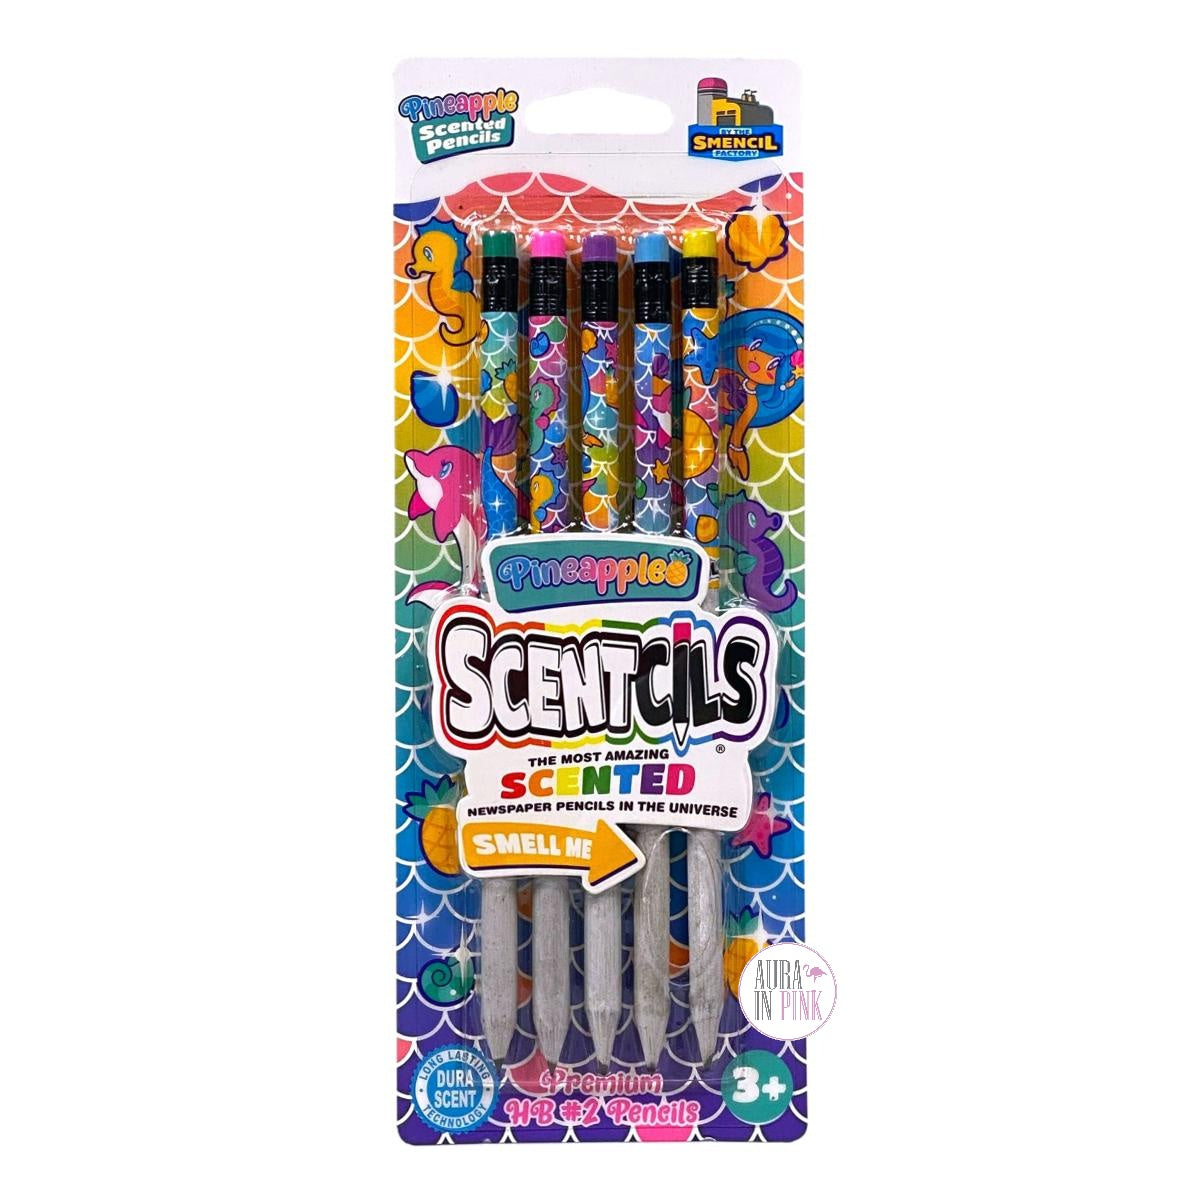 Colored Smencils - Gourmet Scented Colored Pencils made from